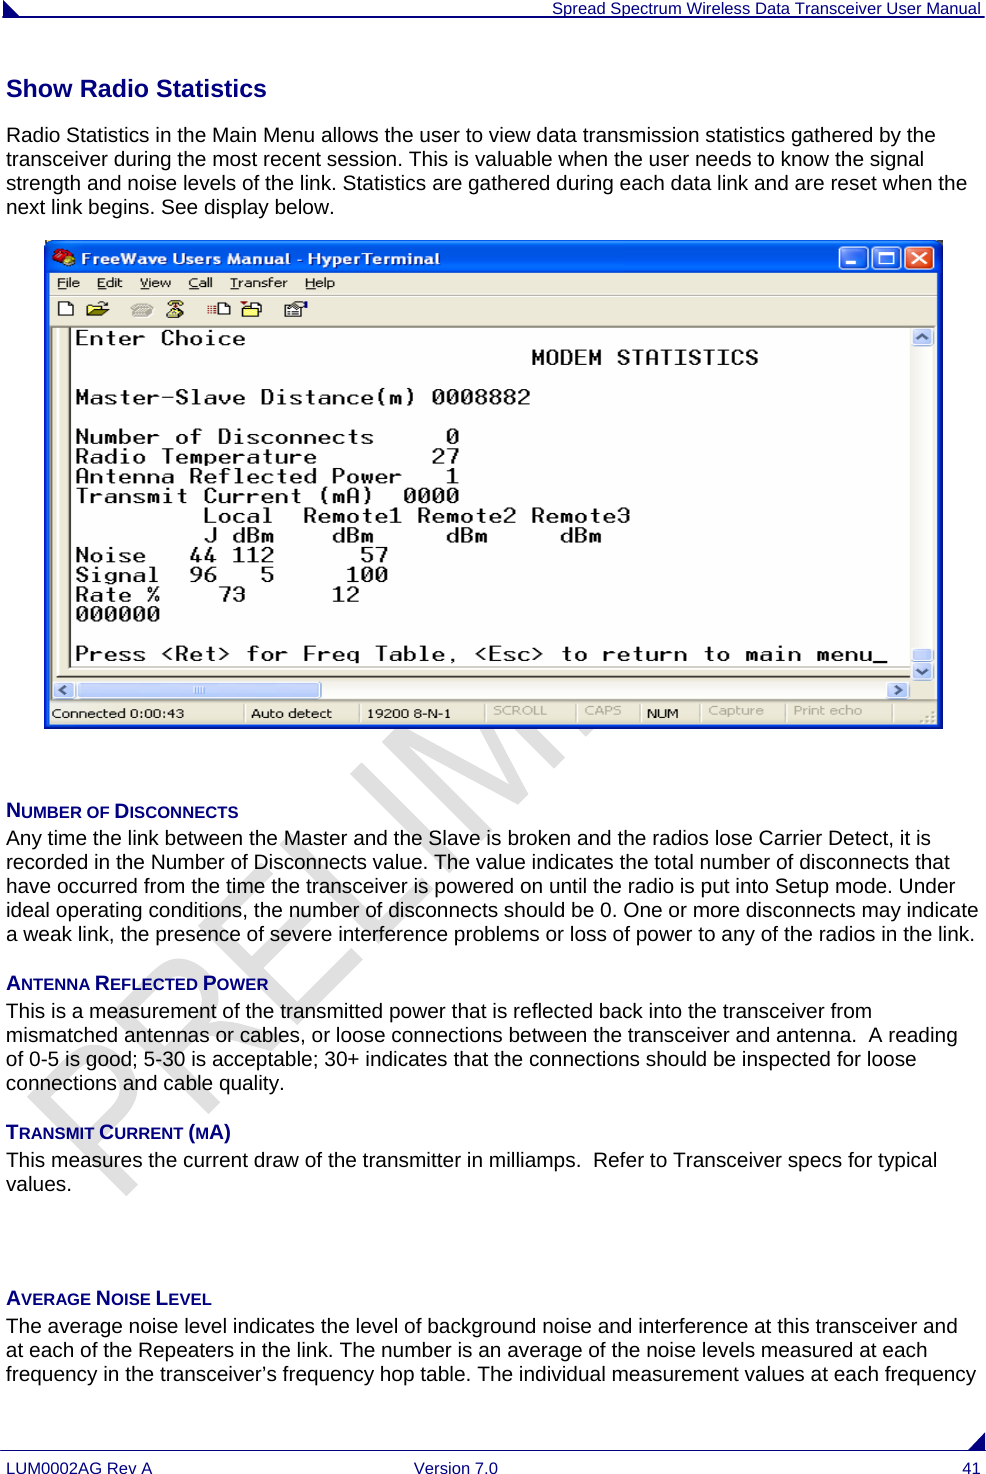  Spread Spectrum Wireless Data Transceiver User Manual LUM0002AG Rev A  Version 7.0  41 Show Radio Statistics  Radio Statistics in the Main Menu allows the user to view data transmission statistics gathered by the transceiver during the most recent session. This is valuable when the user needs to know the signal strength and noise levels of the link. Statistics are gathered during each data link and are reset when the next link begins. See display below.   NUMBER OF DISCONNECTS Any time the link between the Master and the Slave is broken and the radios lose Carrier Detect, it is recorded in the Number of Disconnects value. The value indicates the total number of disconnects that have occurred from the time the transceiver is powered on until the radio is put into Setup mode. Under ideal operating conditions, the number of disconnects should be 0. One or more disconnects may indicate a weak link, the presence of severe interference problems or loss of power to any of the radios in the link. ANTENNA REFLECTED POWER This is a measurement of the transmitted power that is reflected back into the transceiver from mismatched antennas or cables, or loose connections between the transceiver and antenna.  A reading of 0-5 is good; 5-30 is acceptable; 30+ indicates that the connections should be inspected for loose connections and cable quality. TRANSMIT CURRENT (MA) This measures the current draw of the transmitter in milliamps.  Refer to Transceiver specs for typical values.   AVERAGE NOISE LEVEL The average noise level indicates the level of background noise and interference at this transceiver and at each of the Repeaters in the link. The number is an average of the noise levels measured at each frequency in the transceiver’s frequency hop table. The individual measurement values at each frequency 